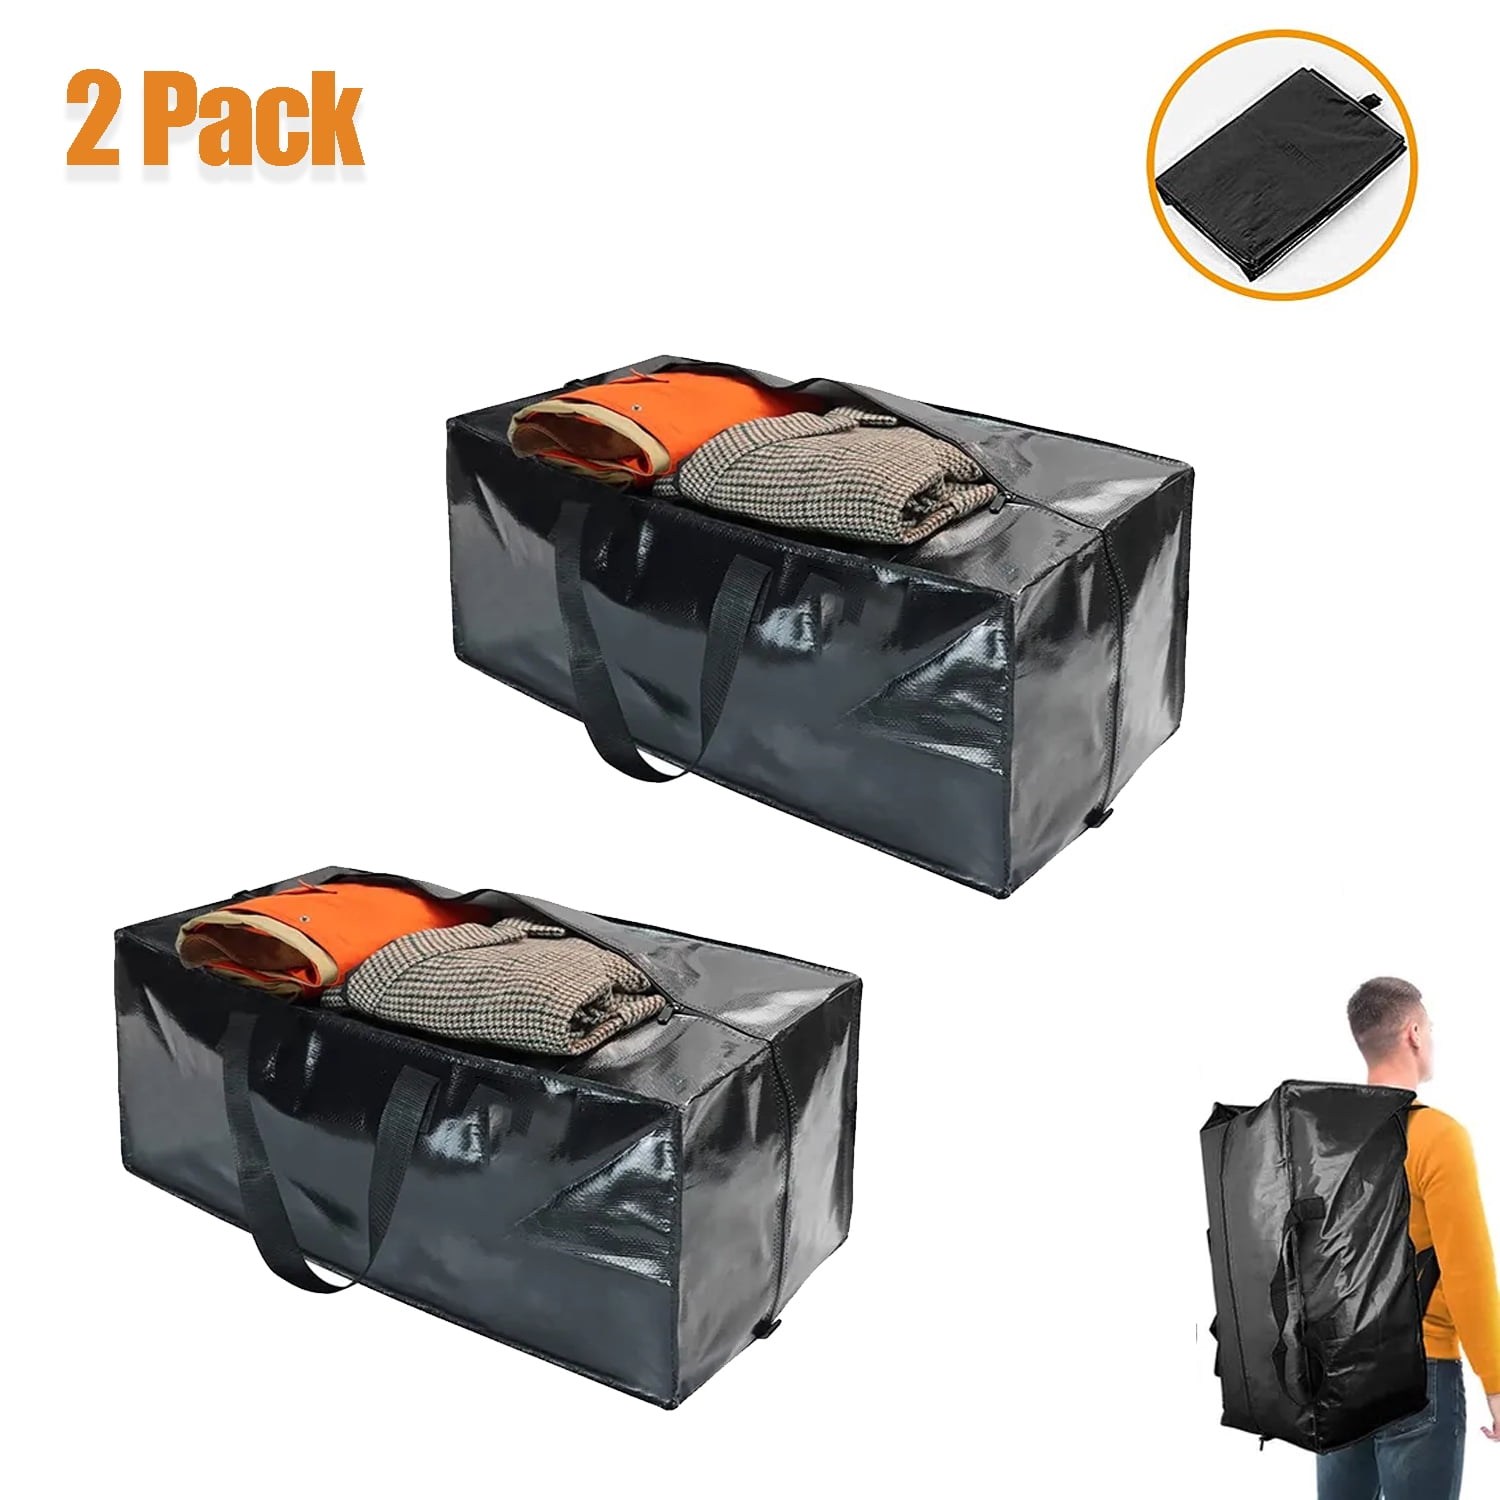 Rihim Moving Bags 90L - 4 Clear Heavy Duty Extra Large Storage Bags for  Clothes - Packing Bags with Backpack Straps Strong Handles Zippers -  College